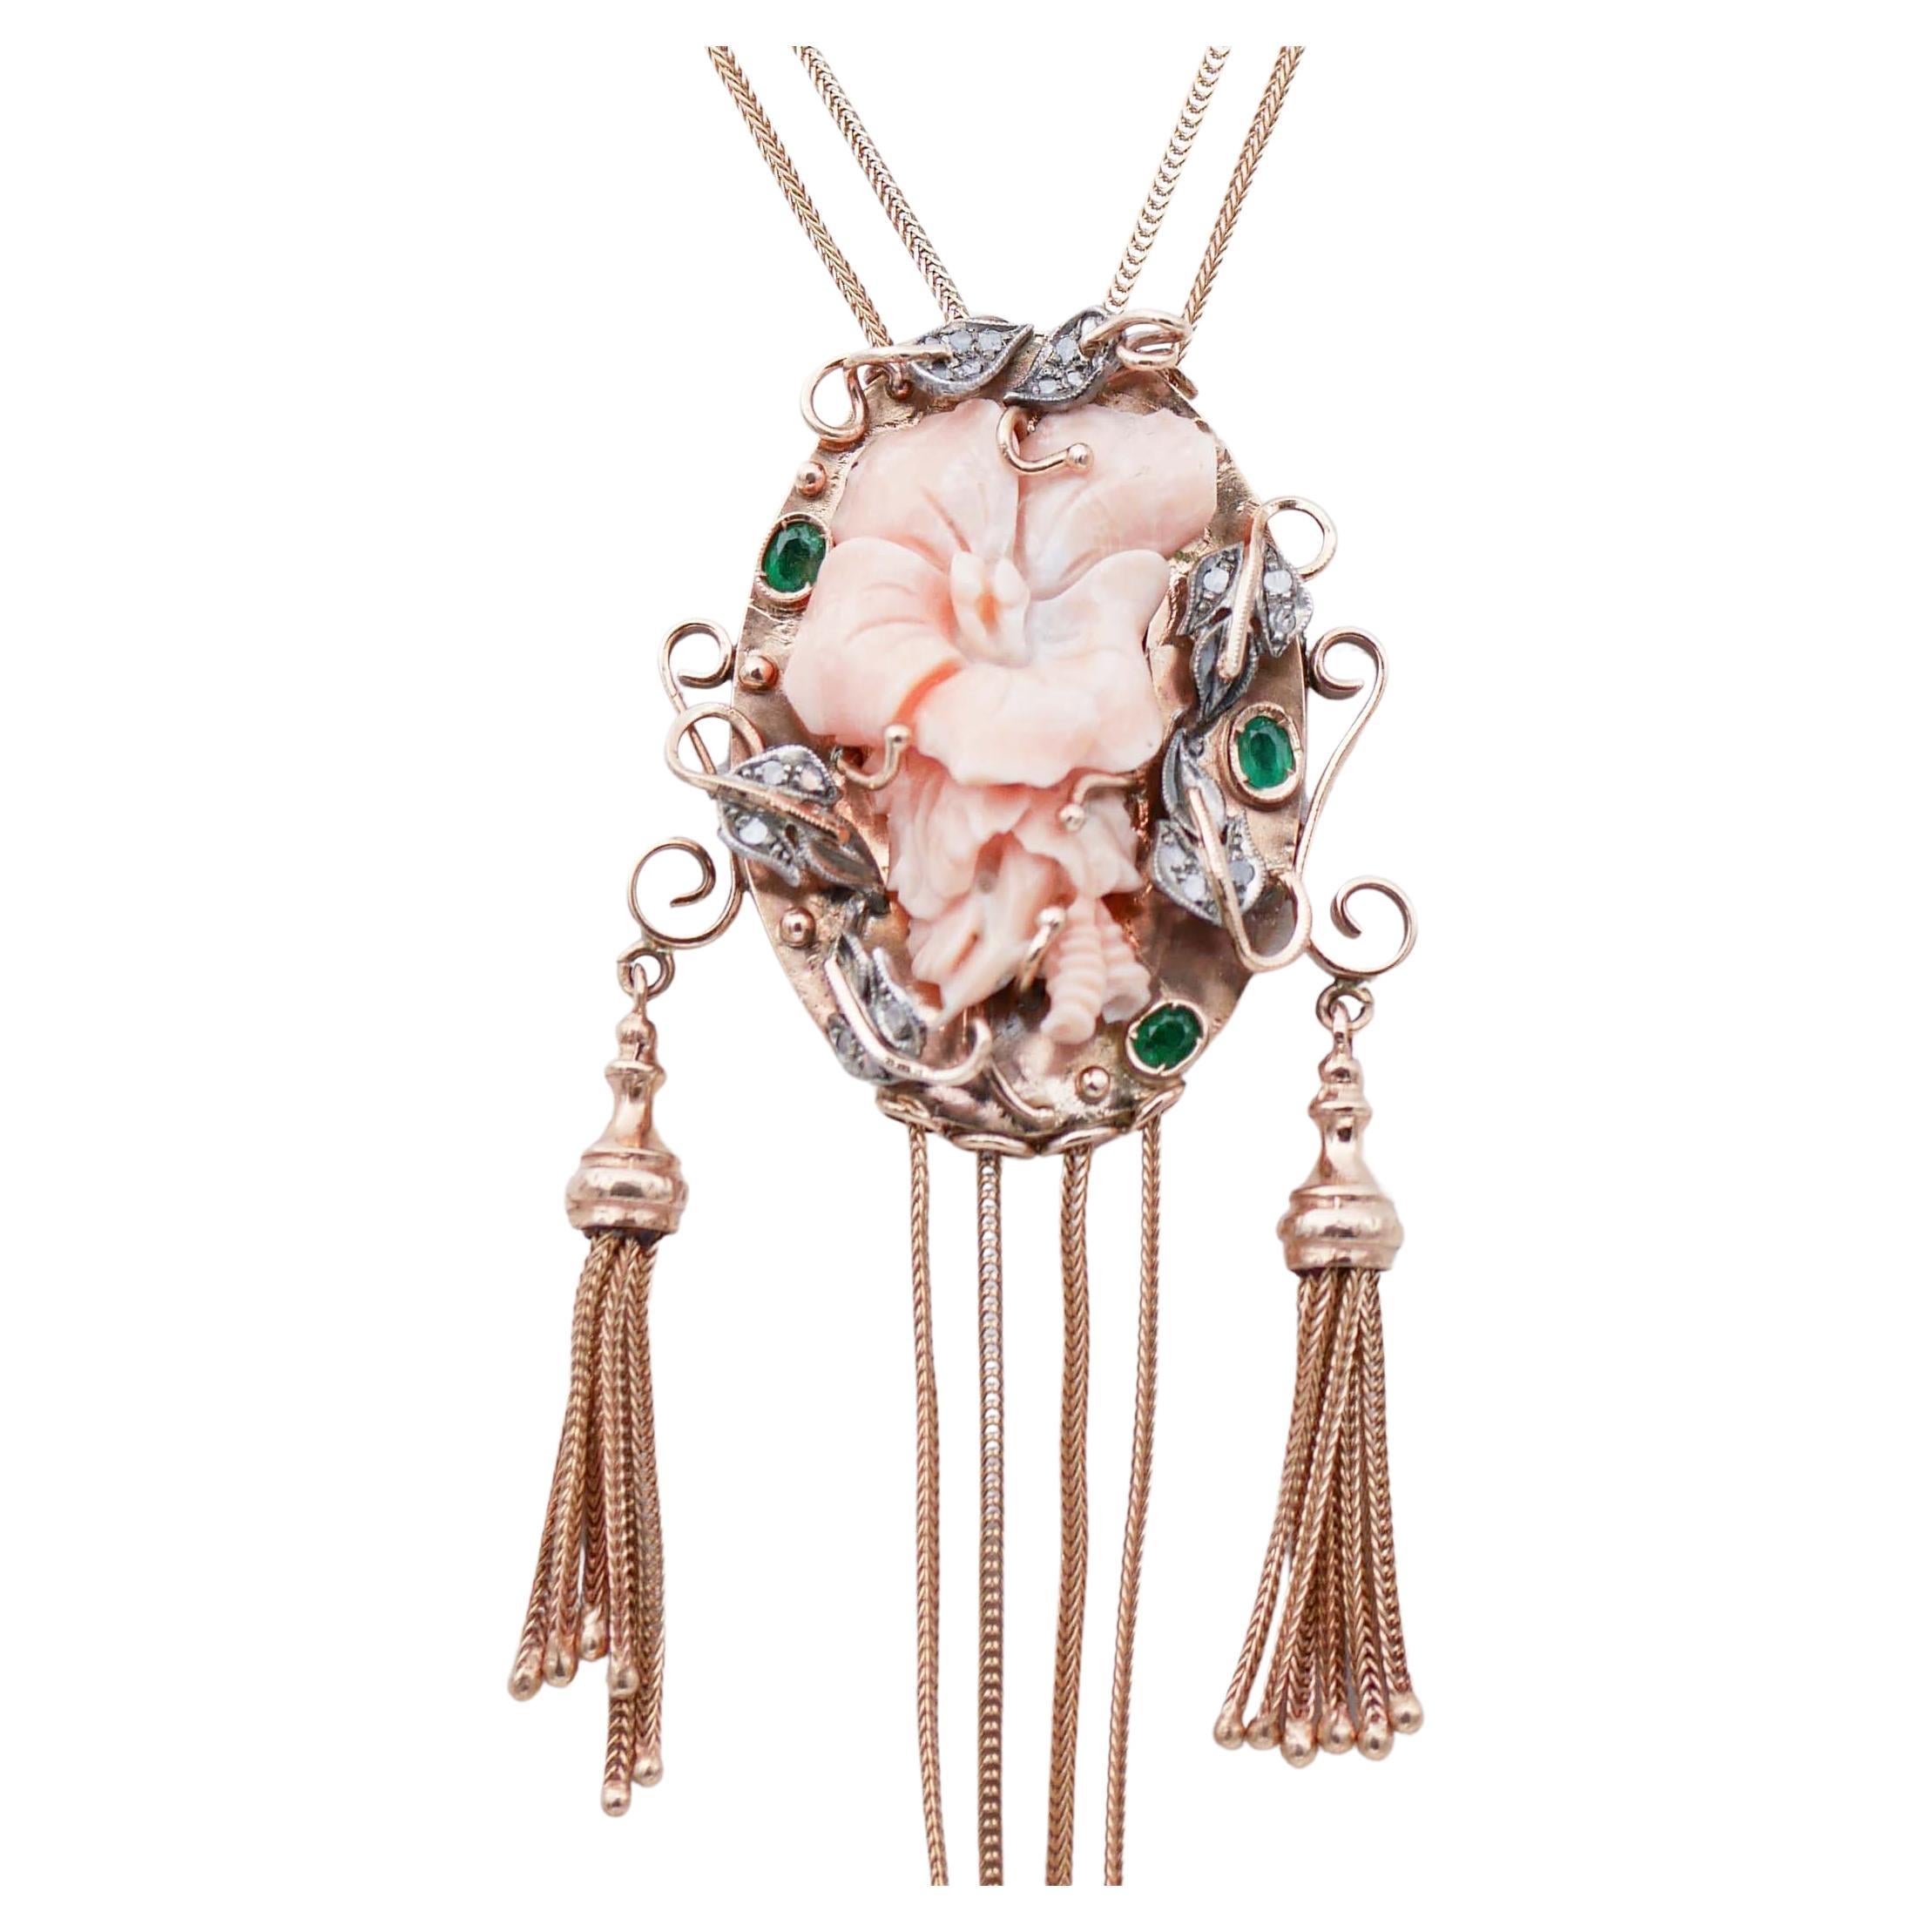 Pink Coral, Emeralds, Diamonds, 14 Karat Rose Gold and Silver Necklace.